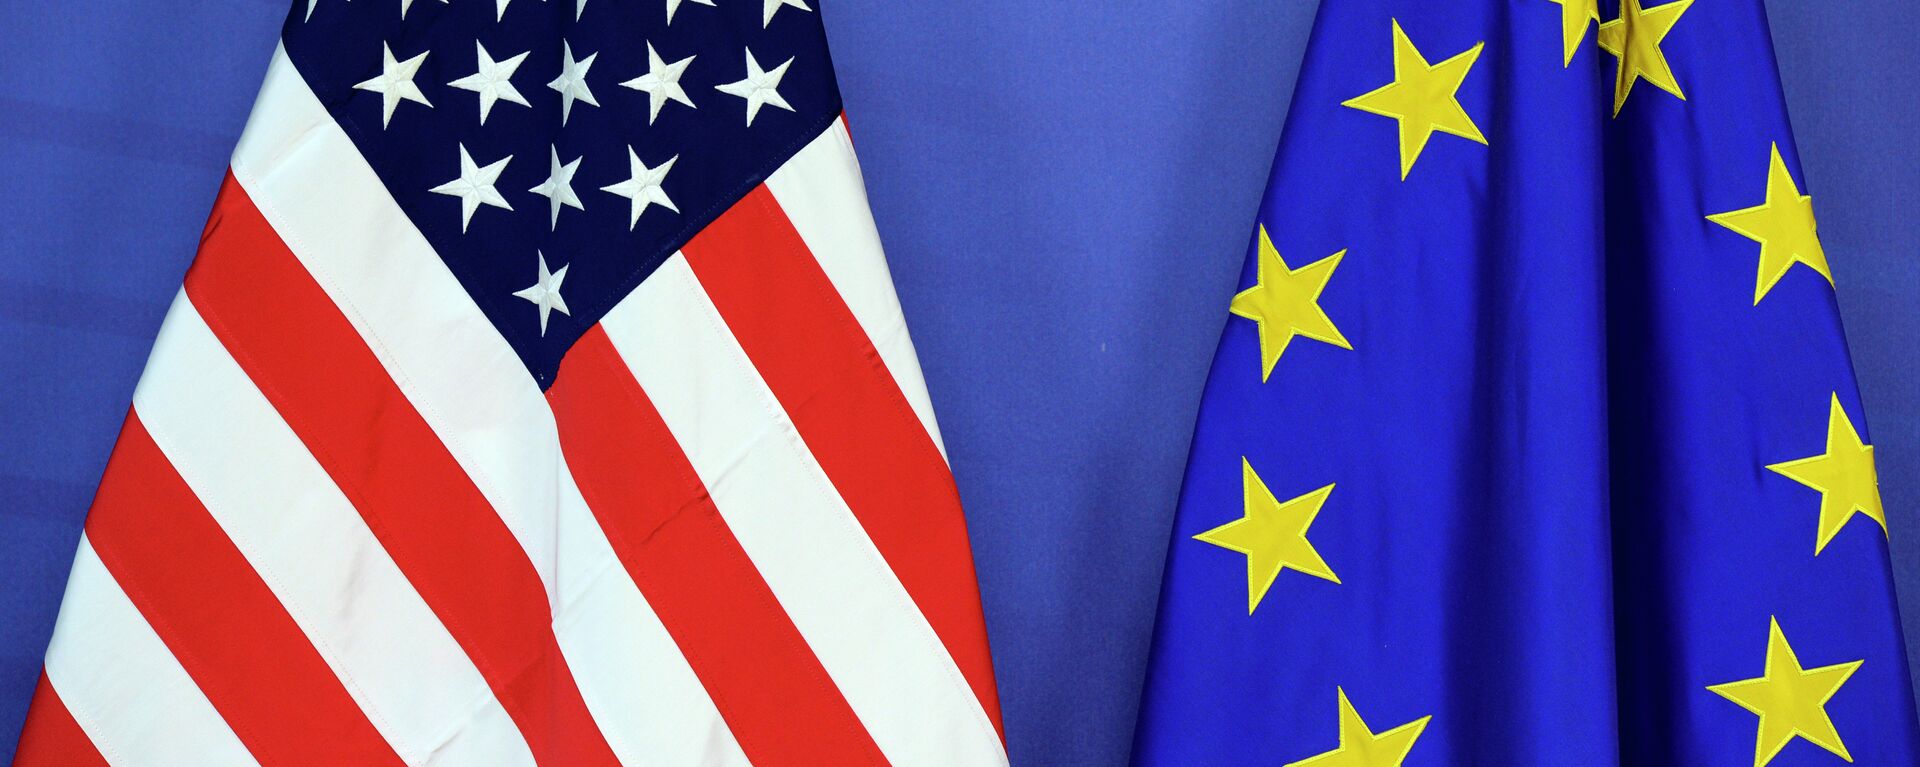 The US national flag (L) and the flag of the European Union are placed side-by-side during the Transatlantic Trade and Investment Partnership (TTIP) meeting at the European Union Commission headquarter in Brussels, on July 13, 2015 - Sputnik Mundo, 1920, 31.03.2022